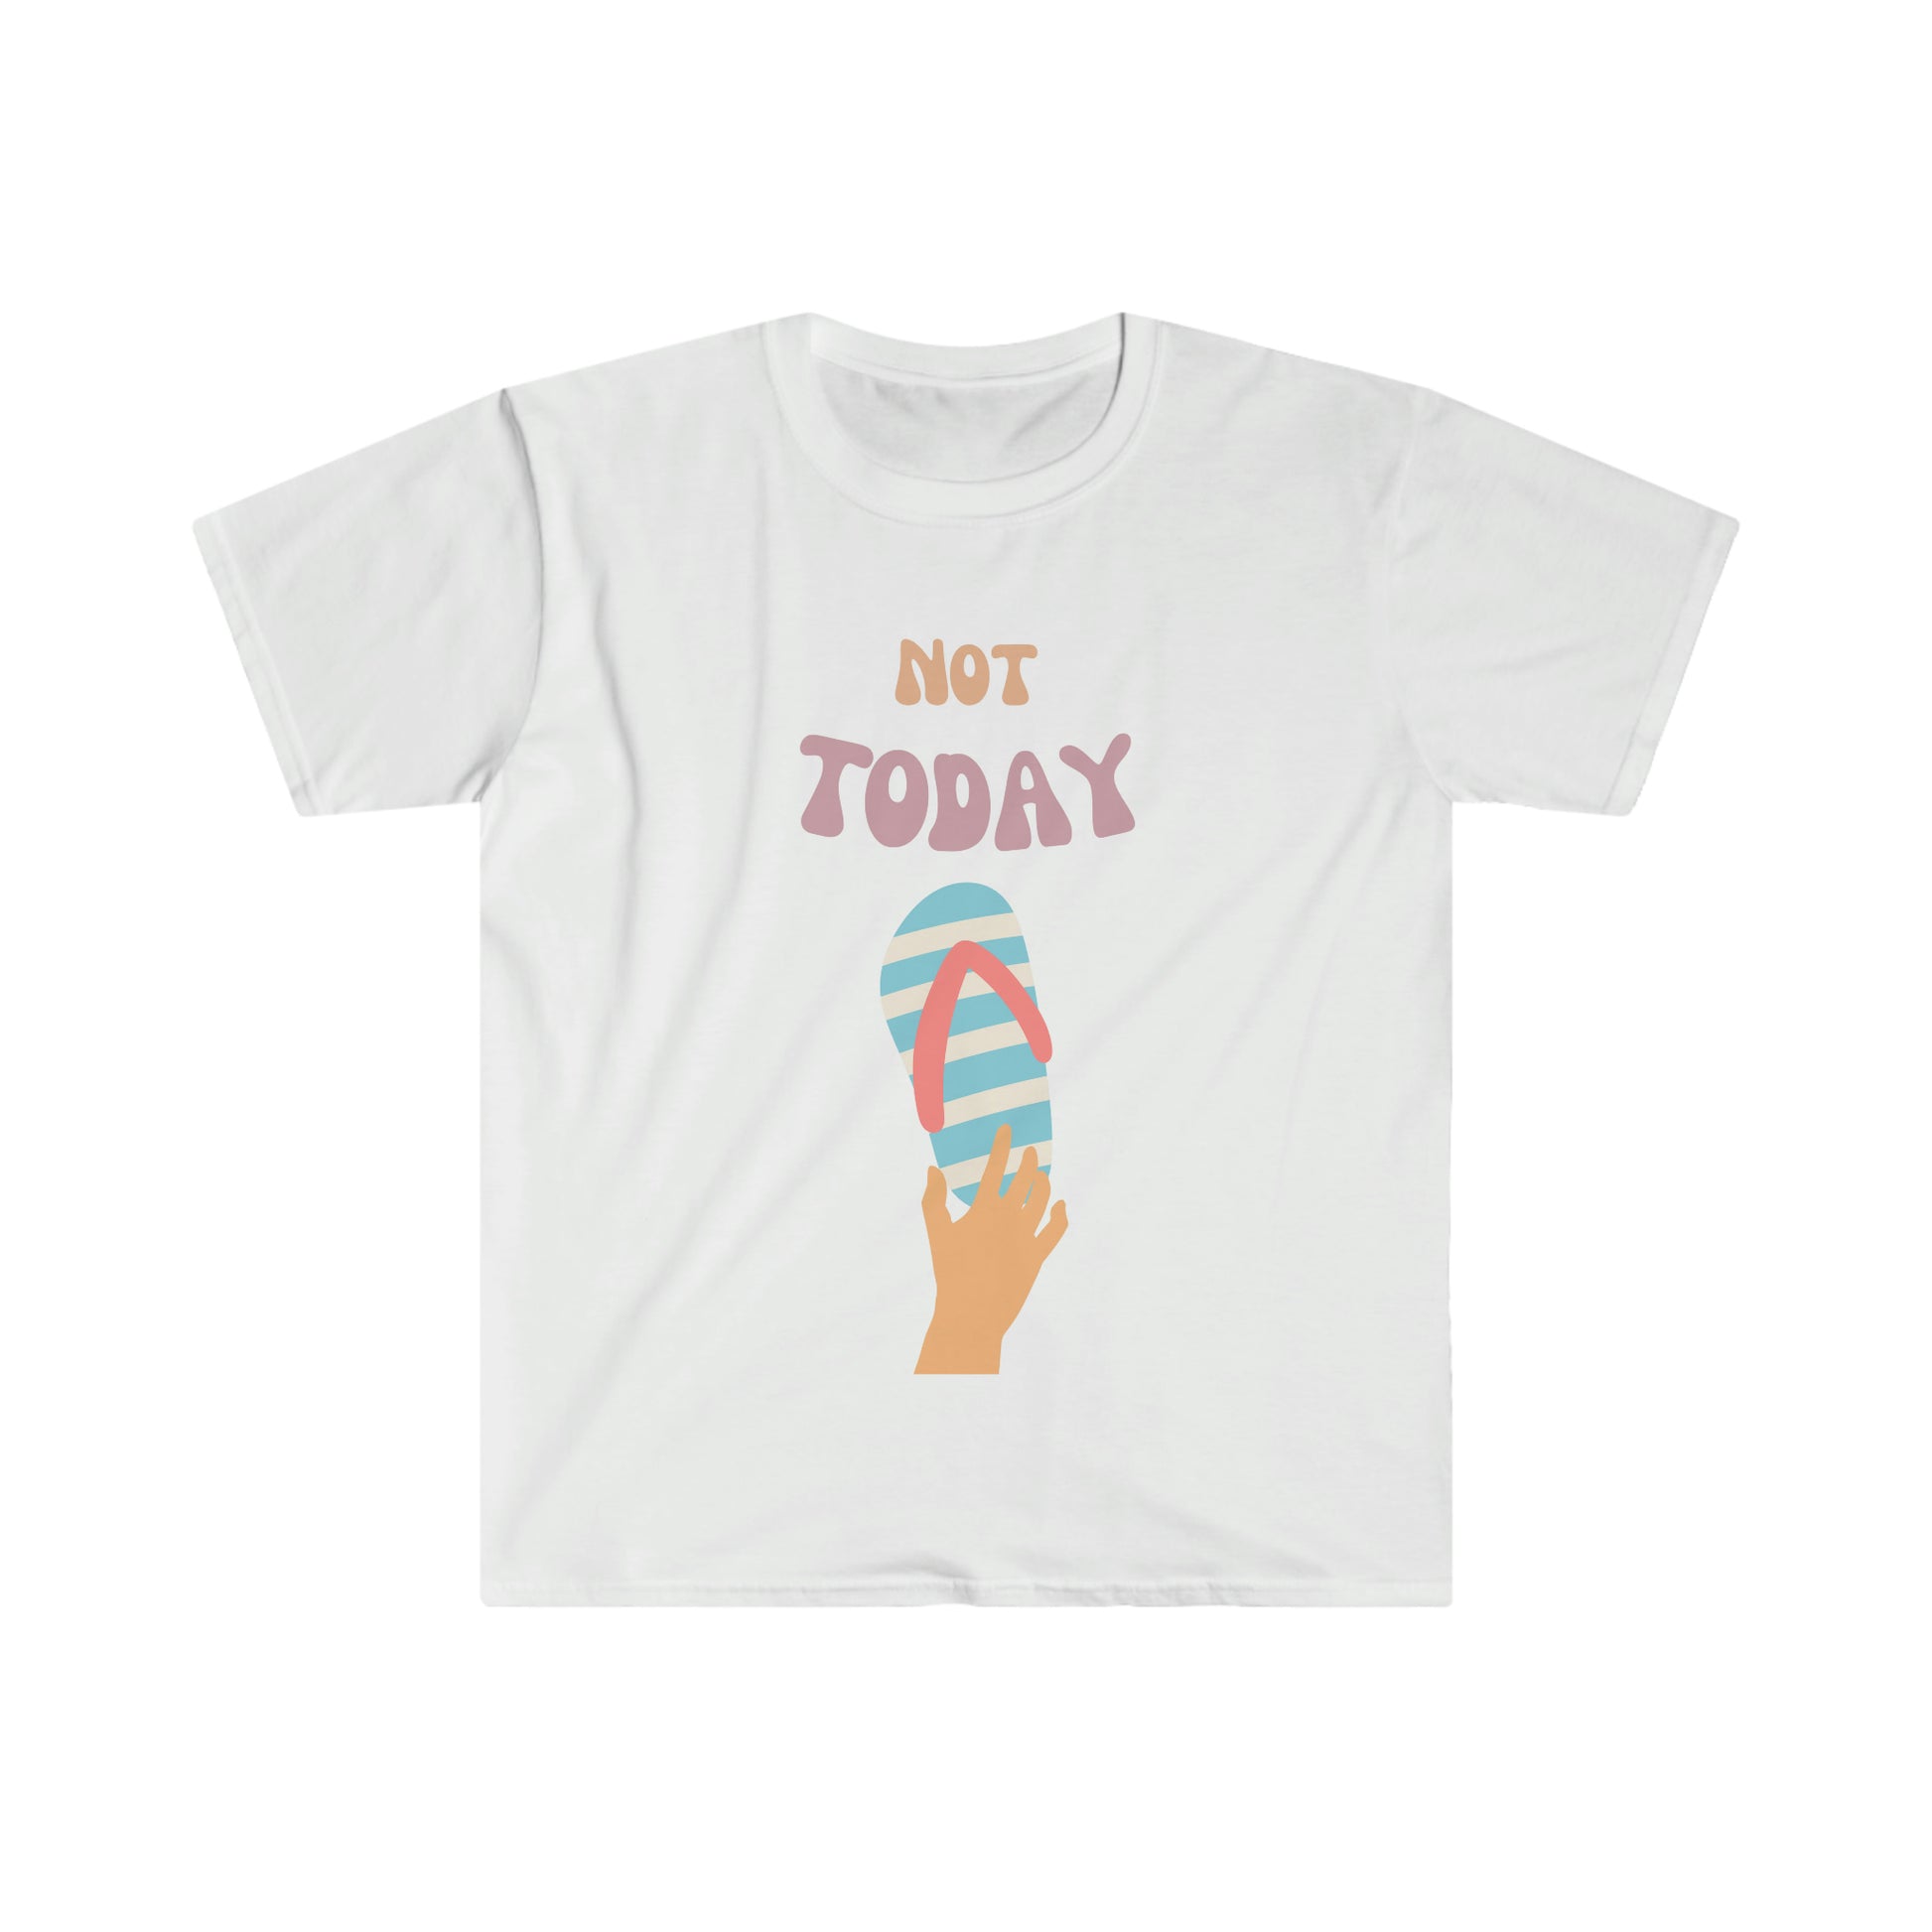 Not Today Shirt, Not Today T-Shirt, One Slipper Soft Shirt, Funny Mom Gift!